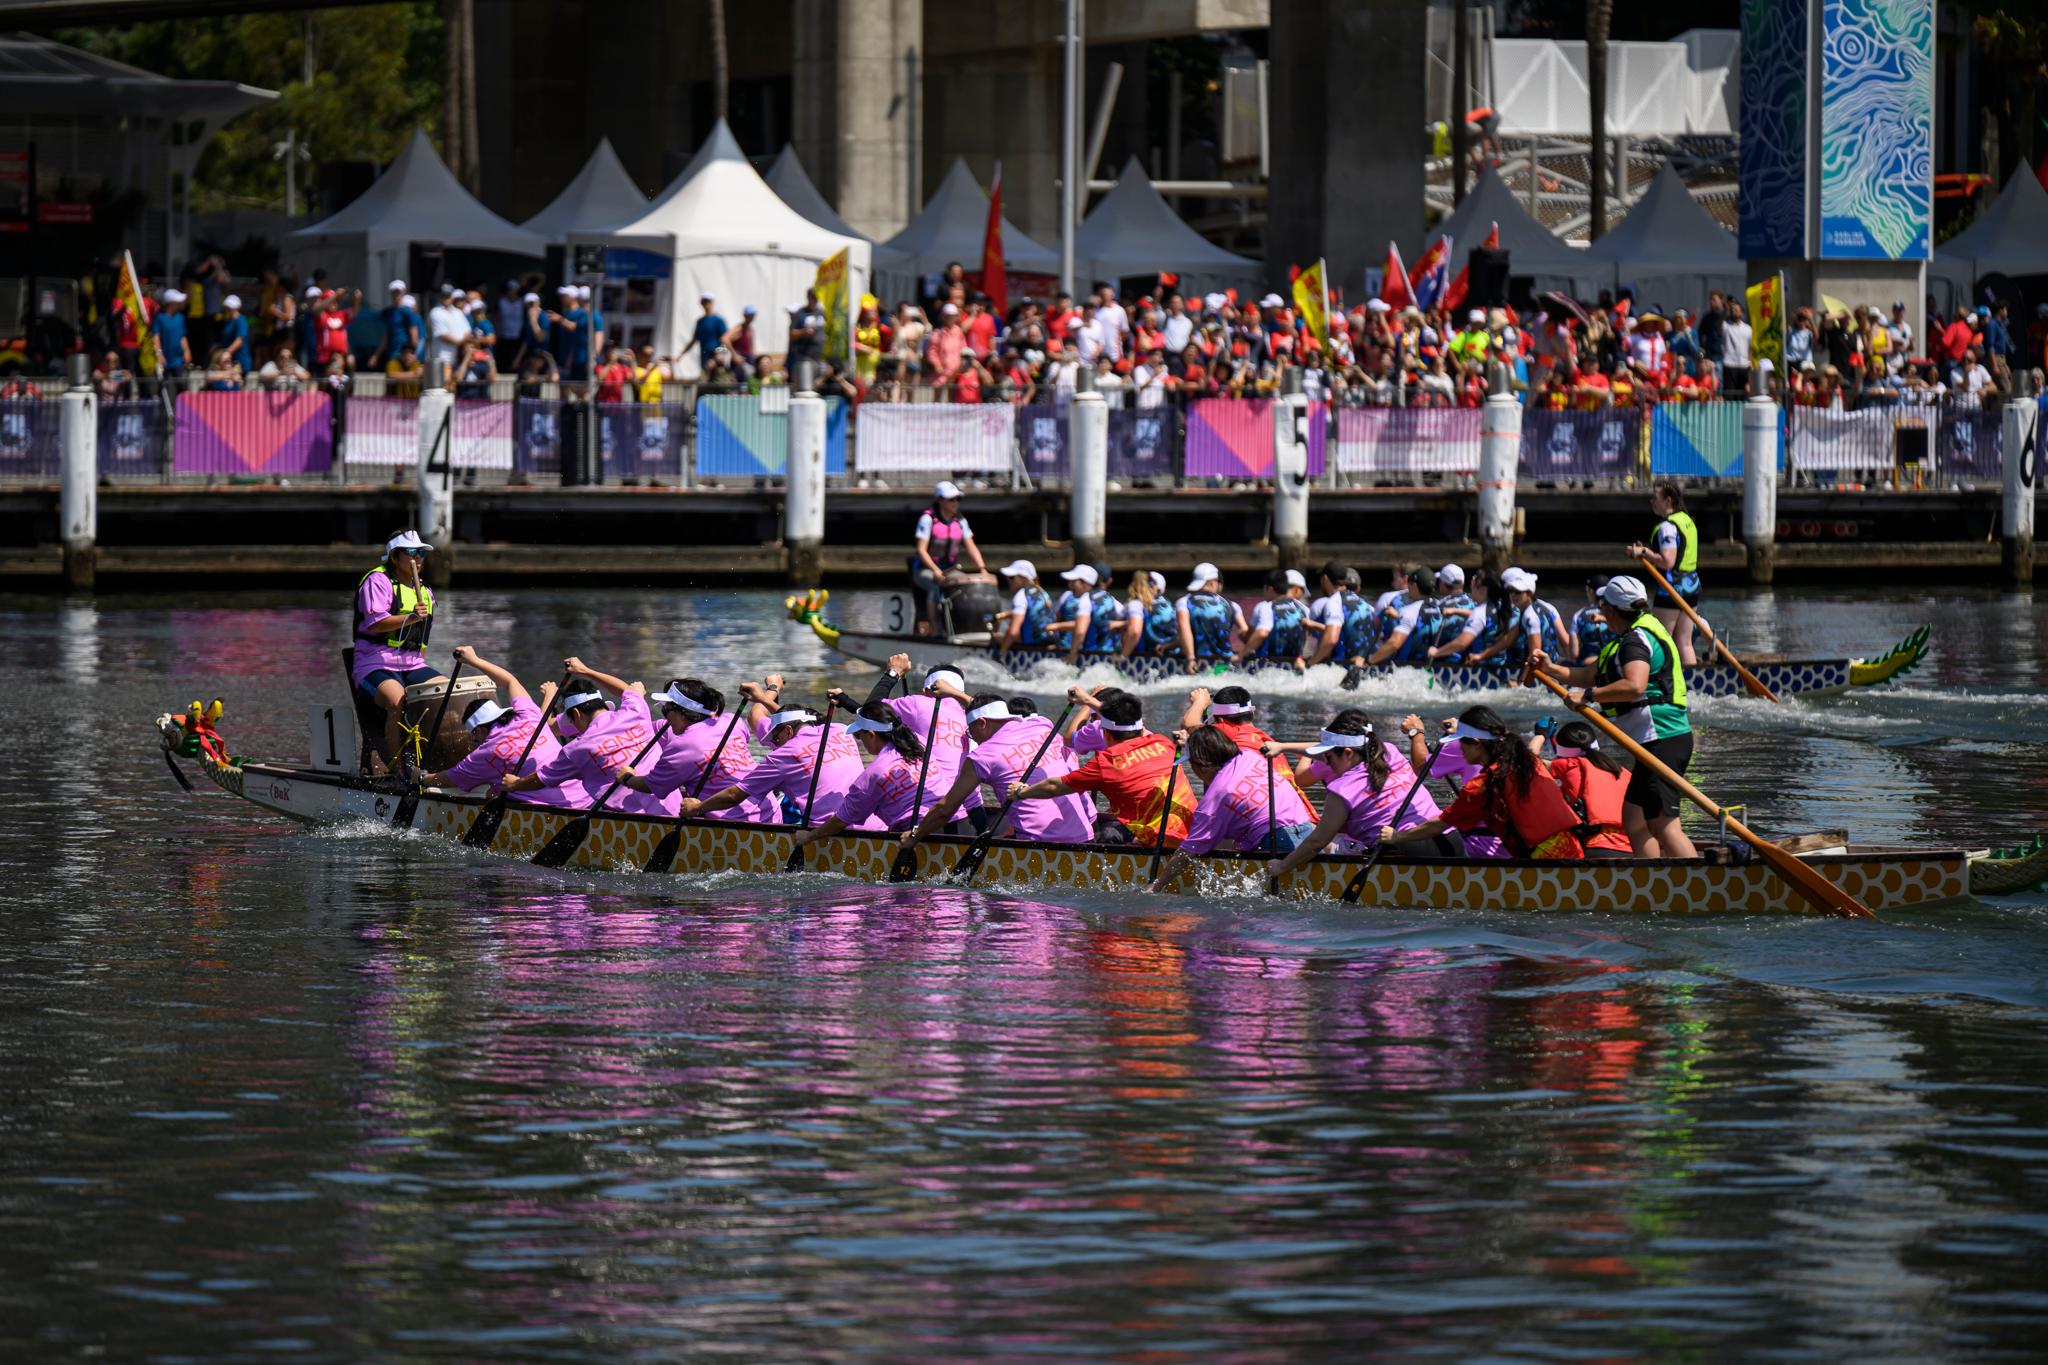 The Hong Kong Economic and Trade Office, Sydney (Sydney ETO) participated in the Sydney Lunar New Year Dragon Boat Festival held in Sydney, Australia, from February 16 to 18. The Sydney ETO formed a team with the Consulate-General of the People's Republic of China in Sydney for the first time to compete on February 16, showcasing this Chinese traditional sport to the public in Australia.

